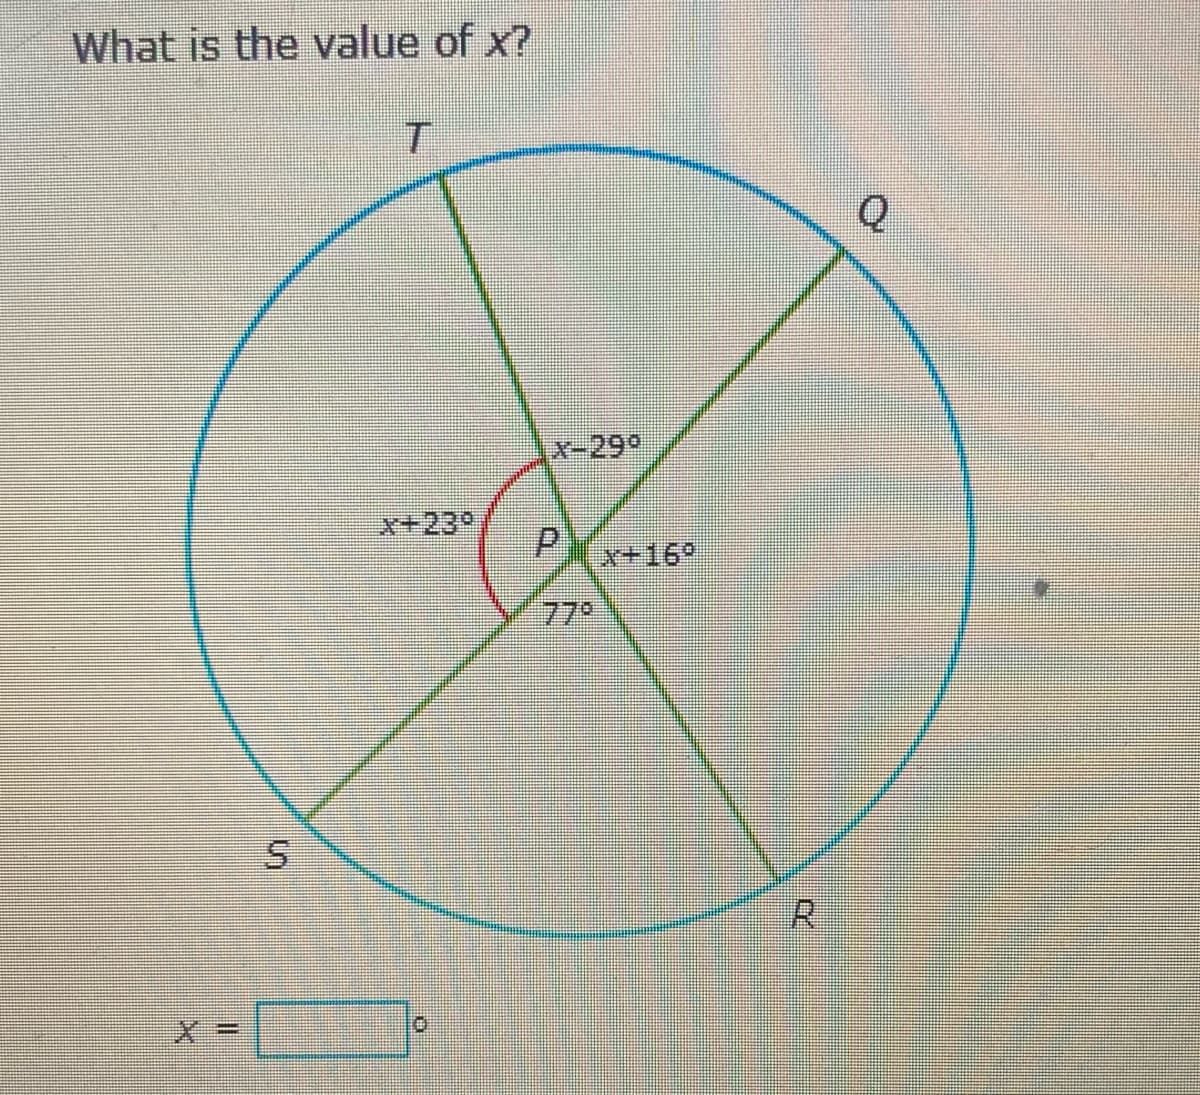 ### What is the value of \( x \)?

![Circle diagram with angles](image-url)

Here is a diagram of a circle centered at point \( P \). The circle has four points on its circumference labeled \( T \), \( Q \), \( R \), and \( S \).

- The arc \( TS \) has a central angle of \( x + 23^\circ \).
- The arc \( SQ \) has a central angle of \( x + 29^\circ \).
- The arc \( QR \) has a central angle of \( x + 16^\circ \).
- The arc \( RT \) has a central angle of \( 77^\circ \).

### To find the value of \( x \):

1. Recognize that the sum of all central angles in a circle is \( 360^\circ \).
2. Set up the equation combining all angles:

\[ 
(x + 23^\circ) + (x + 29^\circ) + (x + 16^\circ) + 77^\circ = 360^\circ 
\]

3. Simplify and solve for \( x \):

\[ 
x + 23 + x + 29 + x + 16 + 77 = 360 
\]

\[ 
3x + 145 = 360 
\]

\[ 
3x = 360 - 145 
\]

\[ 
3x = 215 
\]

\[ 
x = \frac{215}{3} 
\]

\[ 
x = 71.67^\circ 
\]

### Therefore, the value of \( x \) is approximately \( 71.67^\circ \).

\[ x = \boxed{71.67} \]